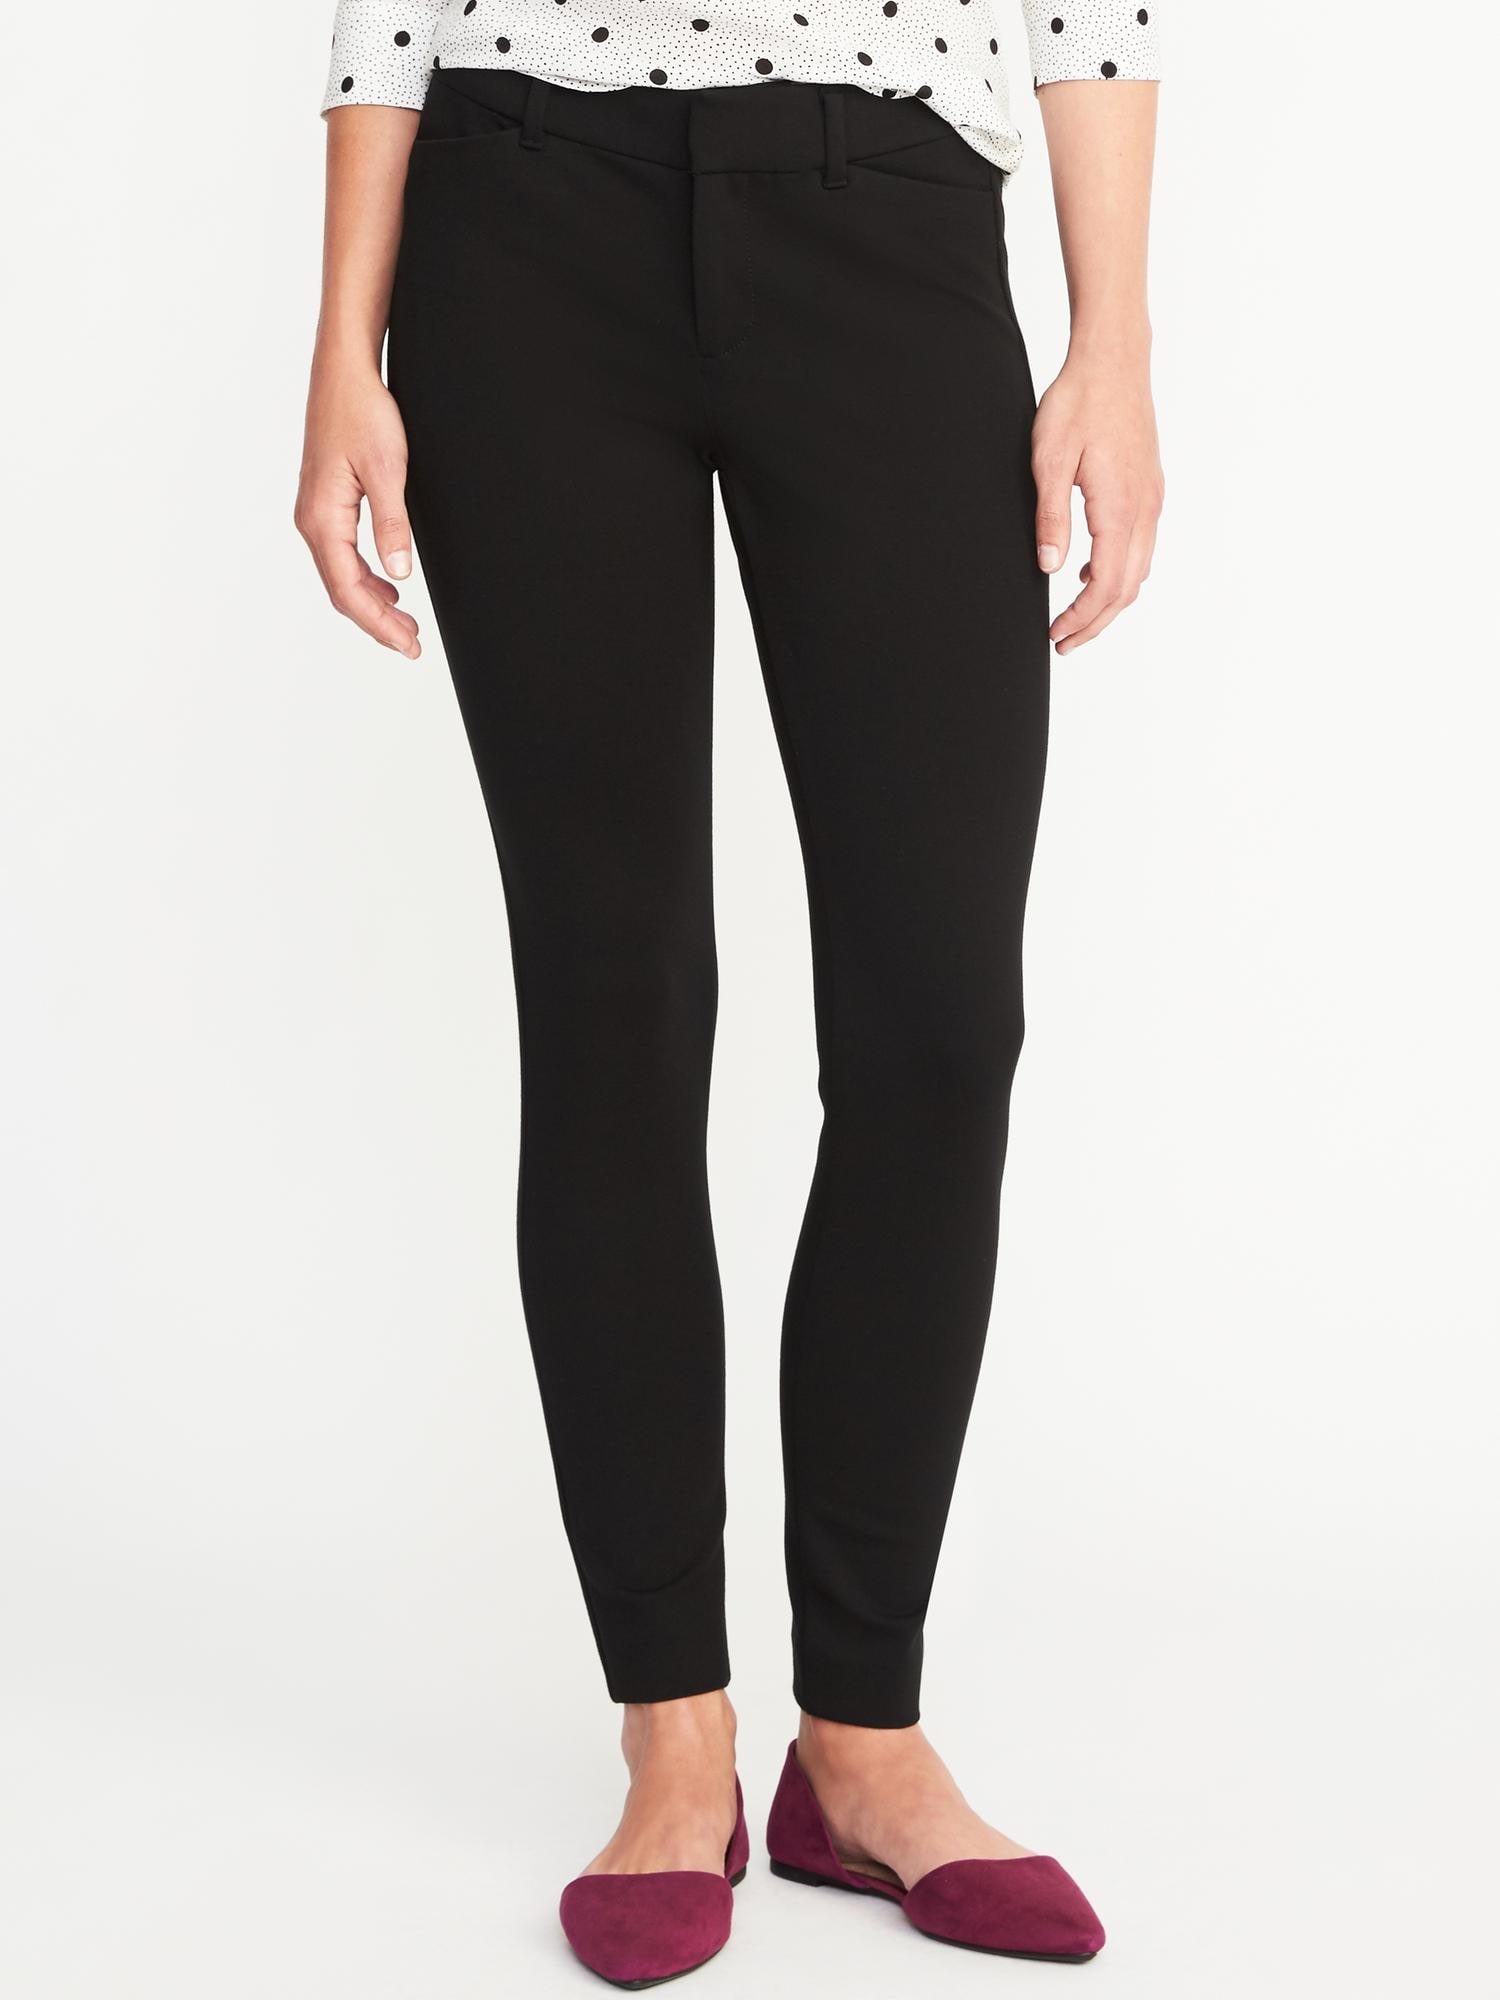 High-Waisted Stevie Metallic Ponte-Knit Pants for Women, Old Navy